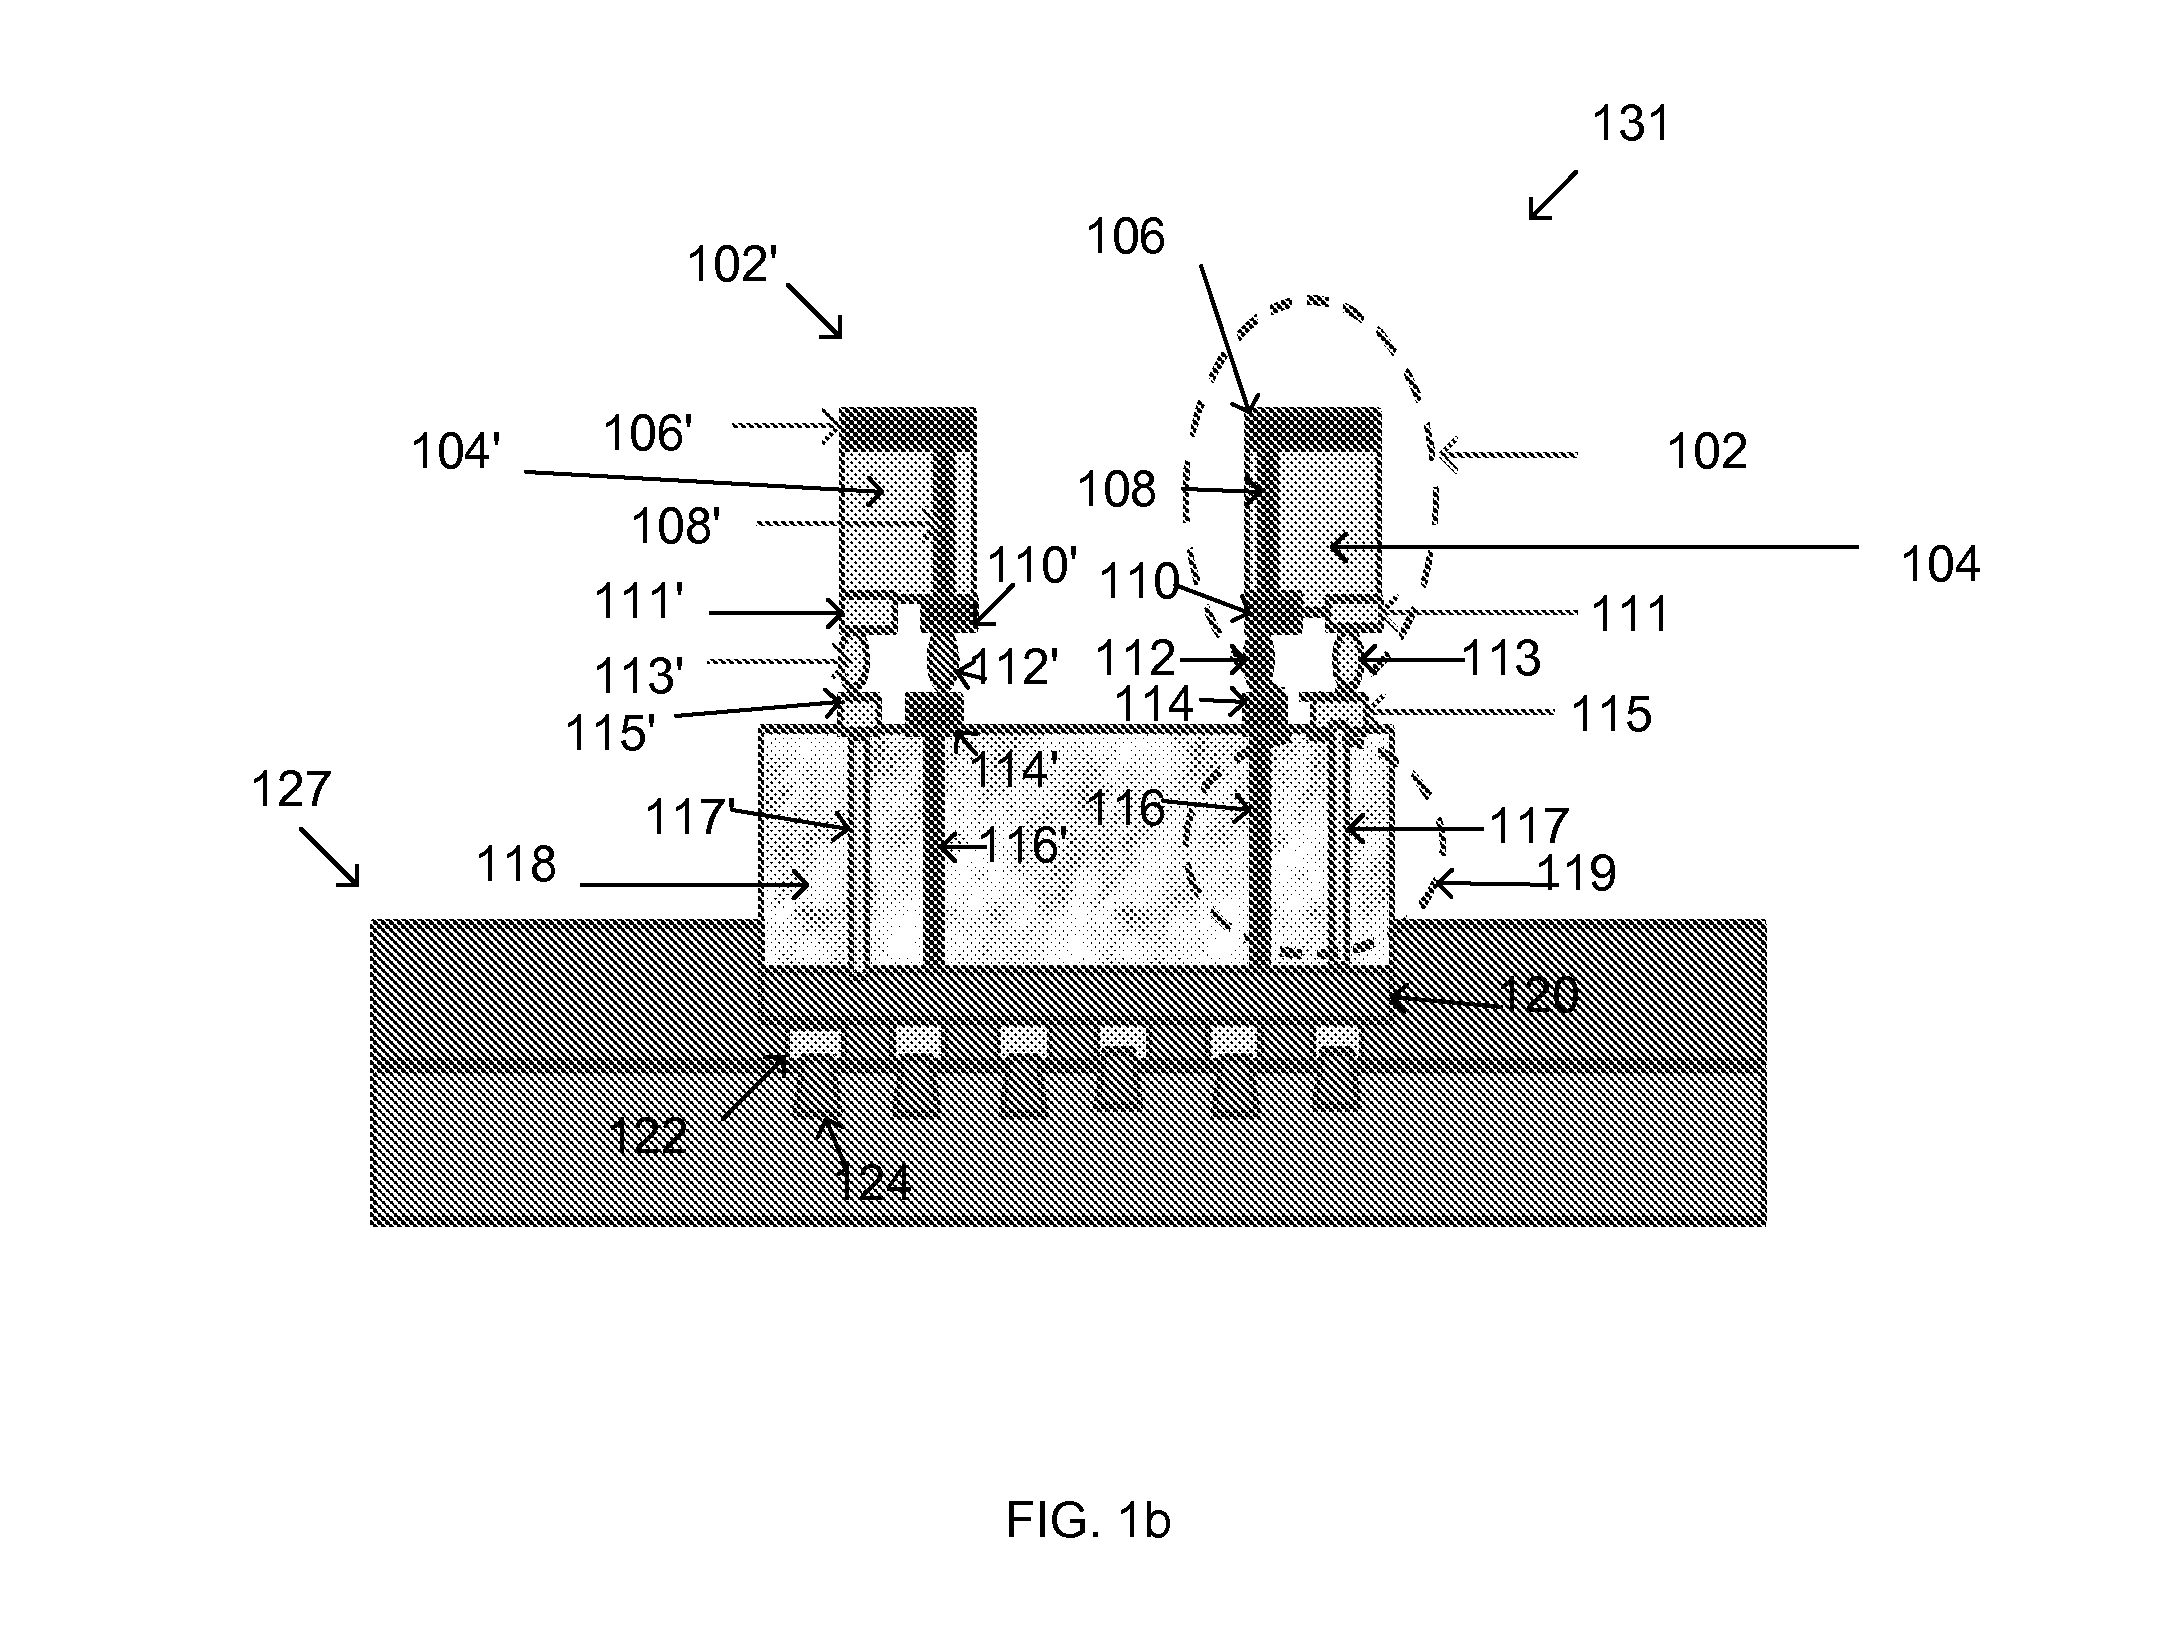 Package structures including discrete antennas assembled on a device